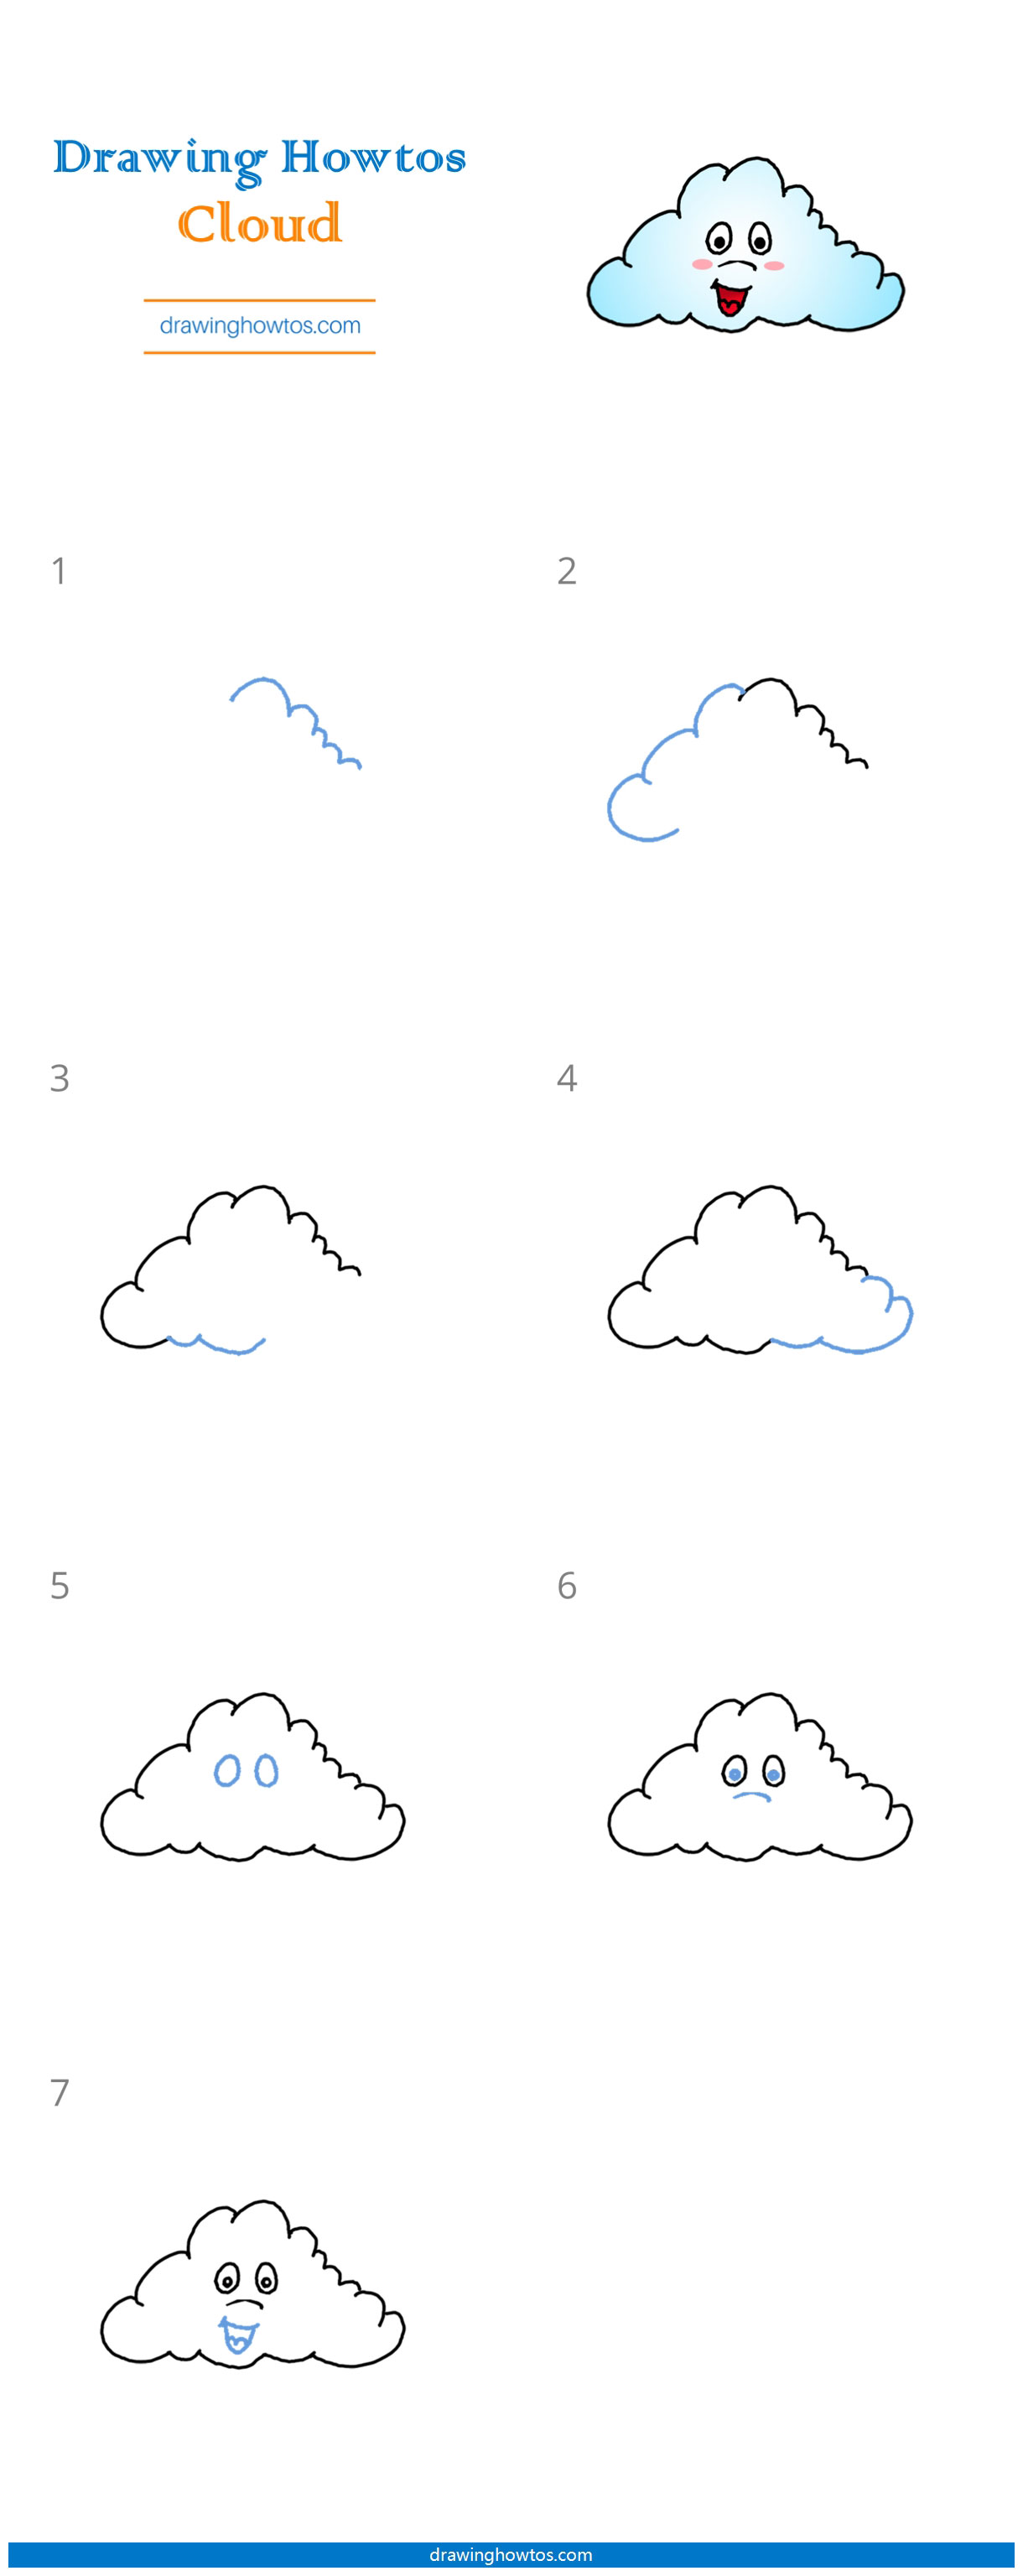 How to Draw Funny Clouds Step by Step